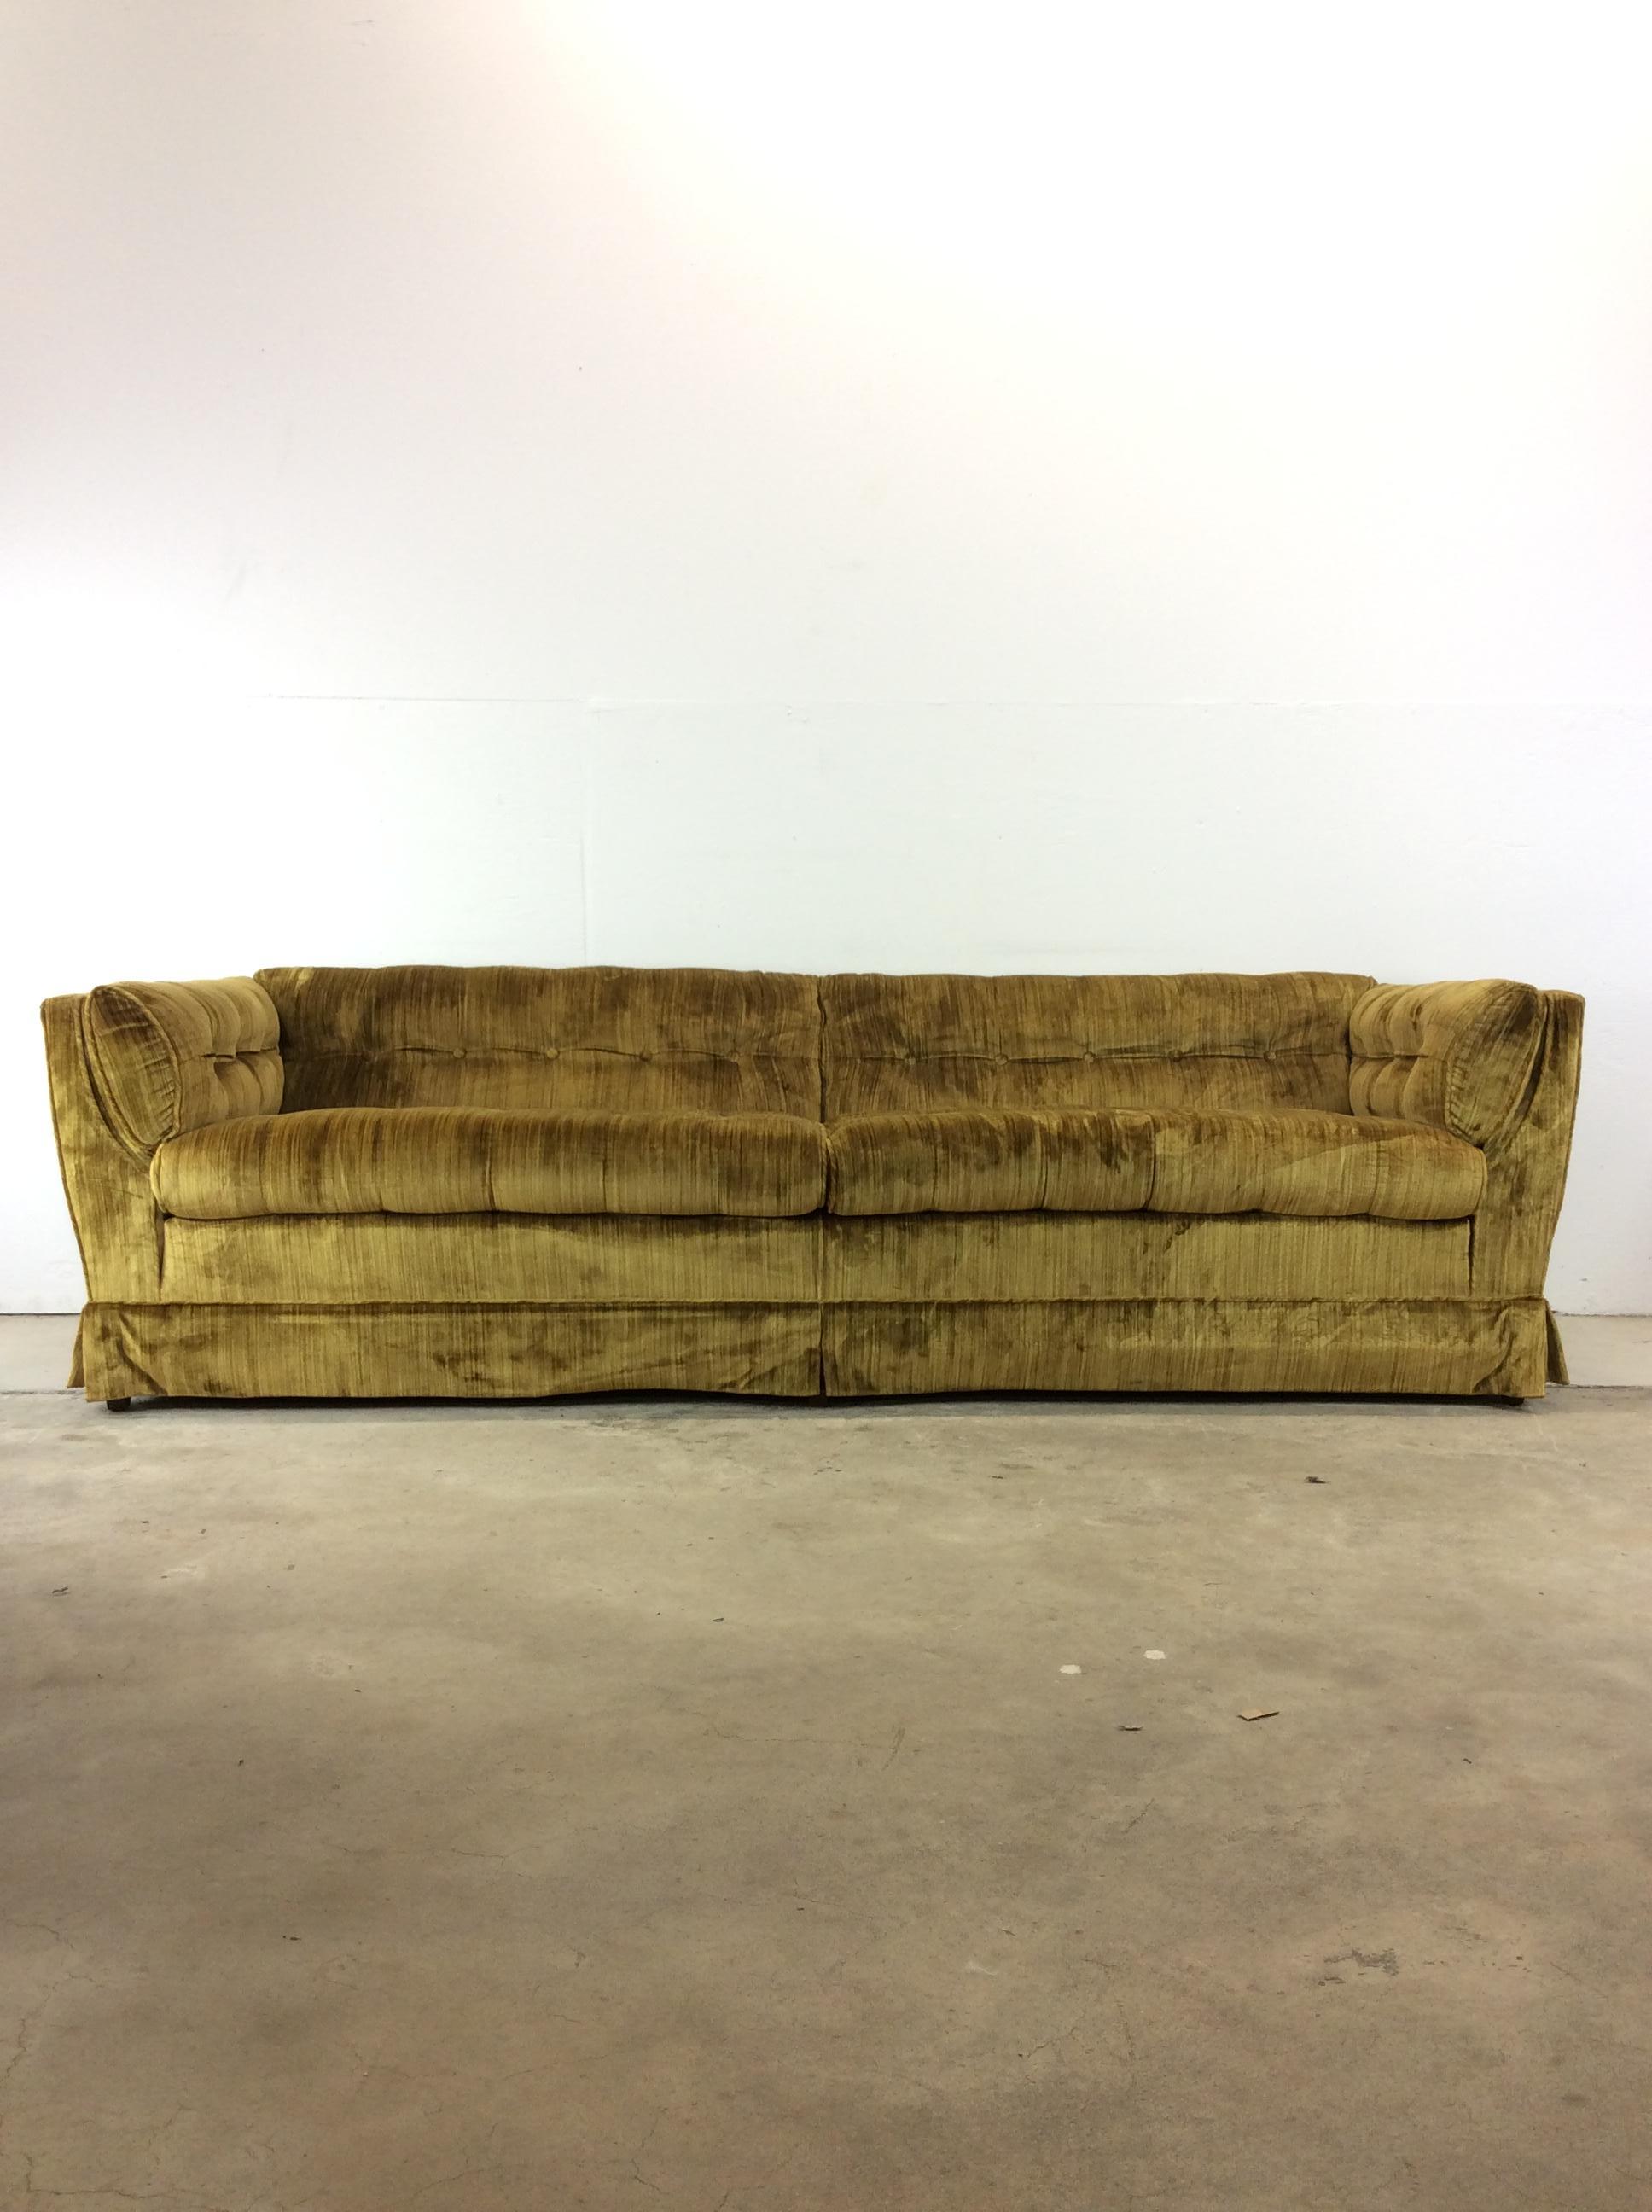 This mid century modern sofa by Art Shoppe features vintage green upholstery throughout (back is upholstered too), tufted seat back and armrests, and removable cushions.

Dimensions: 95.5w 35d 26h 19sh 26ah

Condition: Other all this vintage